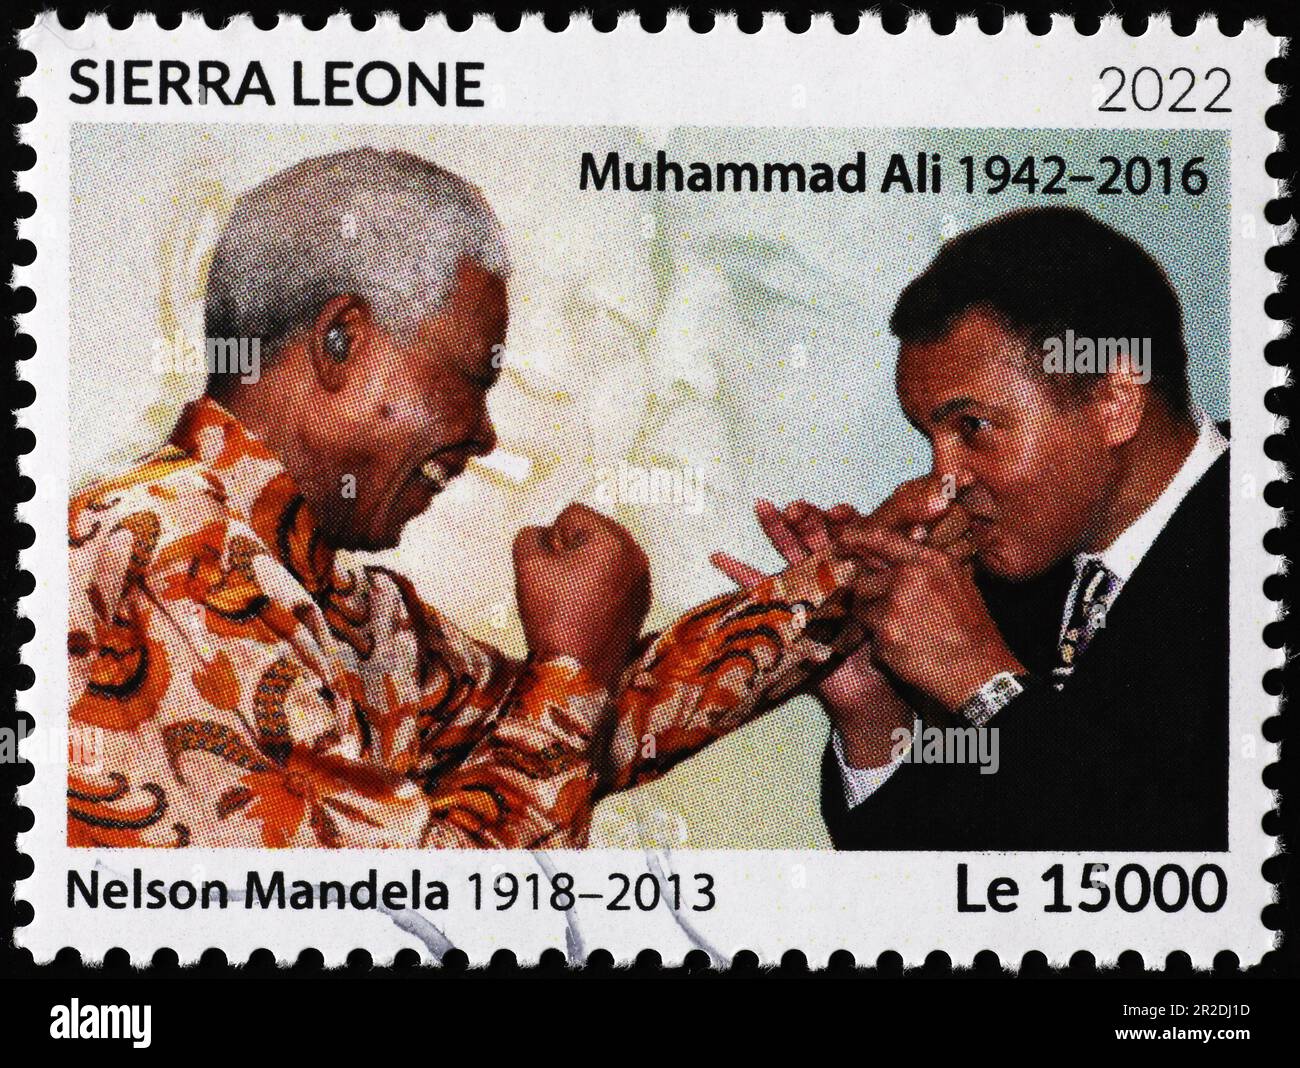 Nelson Mandela and Mohammad Alì on postage stamp Stock Photo